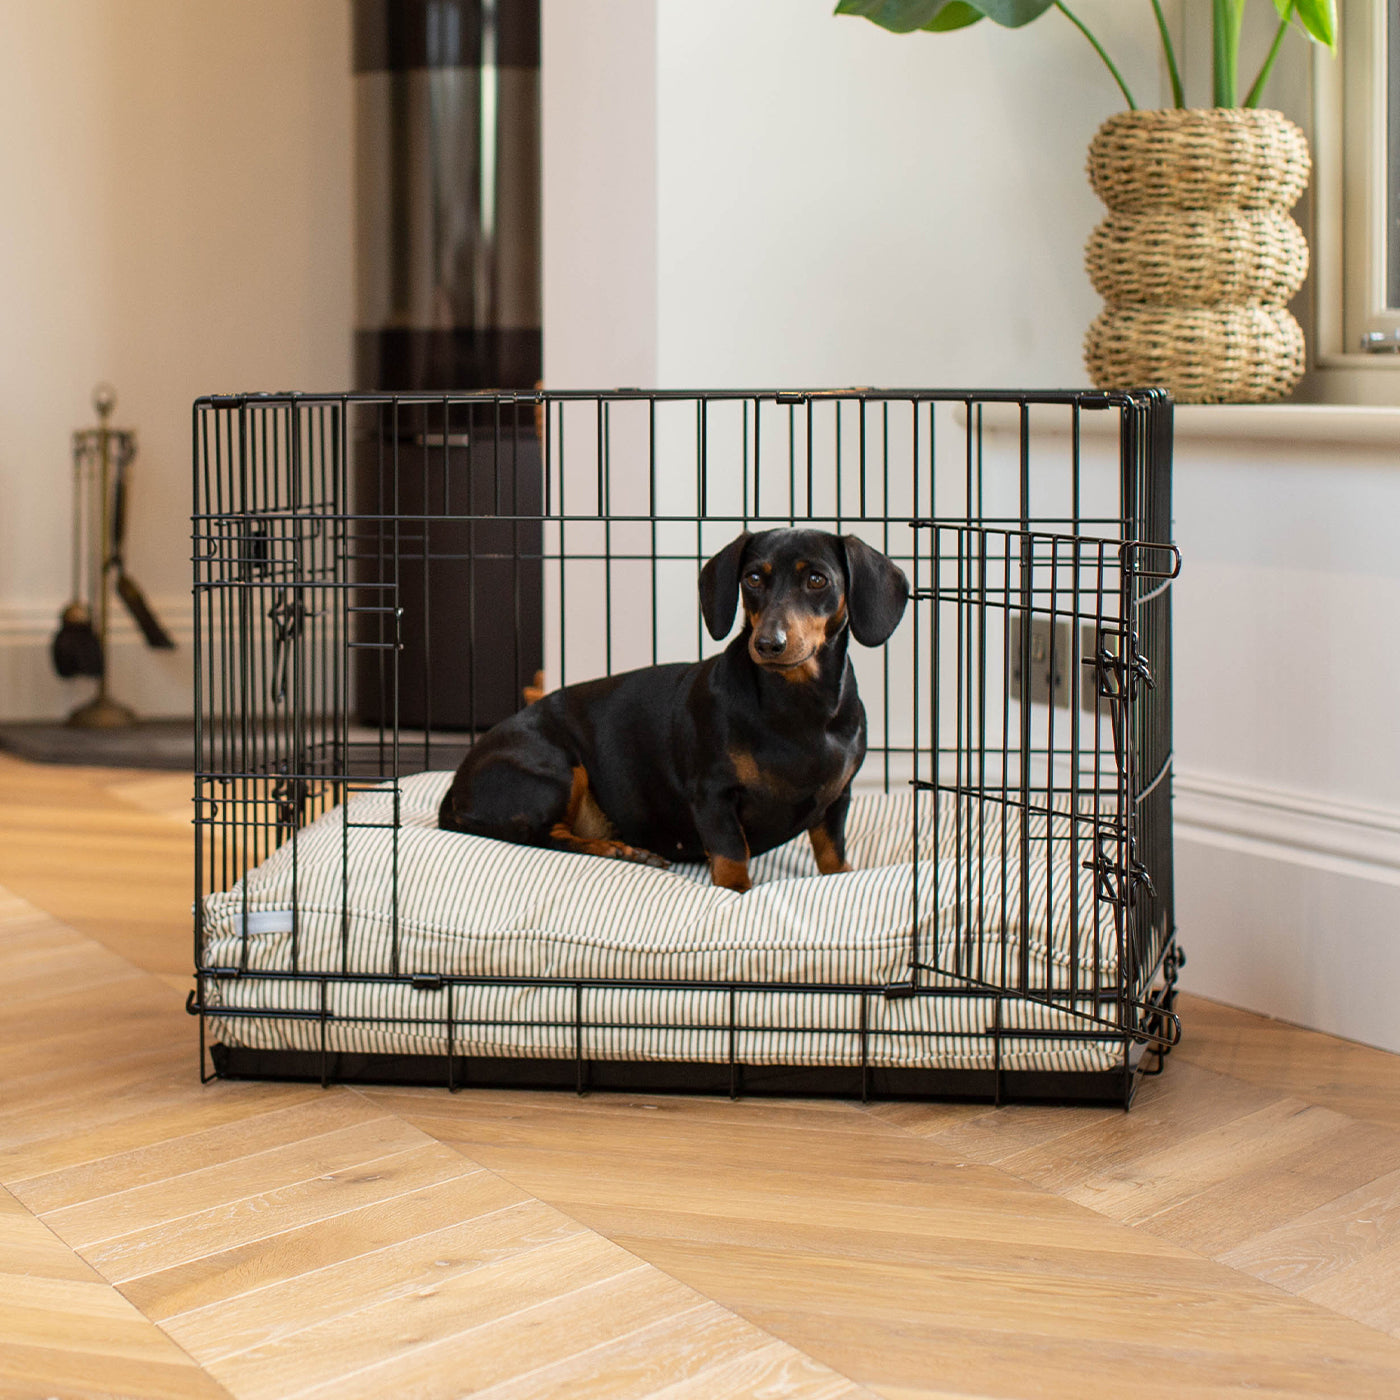 Luxury Dog Crate Cushion, Regency Stripe Crate Cushion The Perfect Dog Crate Accessory, Available To Personalise Now at Lords & Labradors